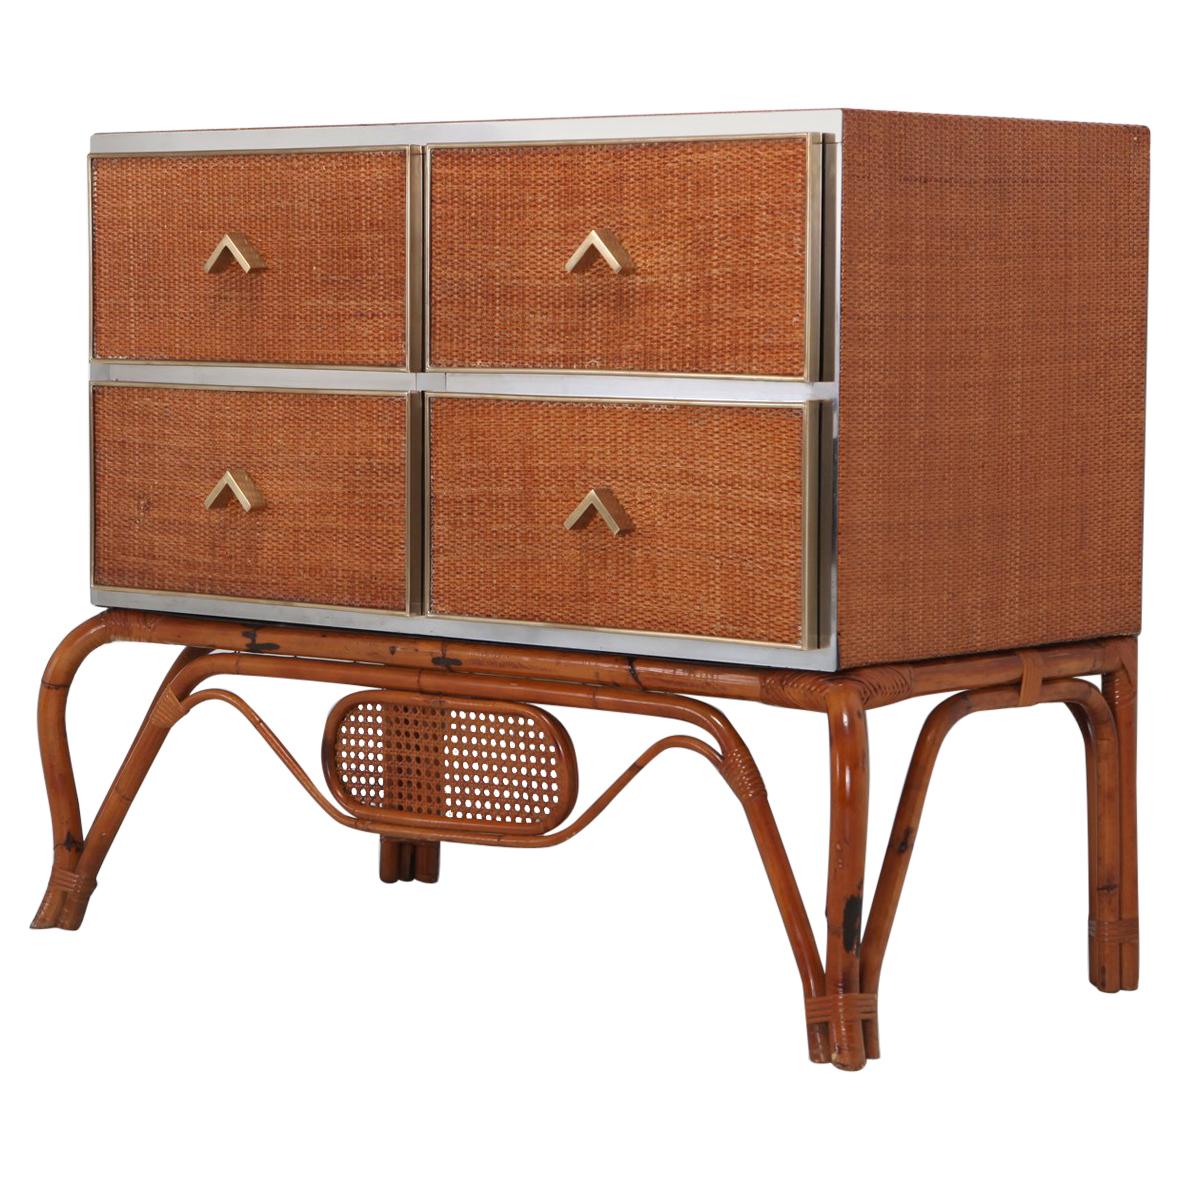 Crespi Style Commode in Rattan, Bamboo, Brass and Chrome by Vivai del Sud